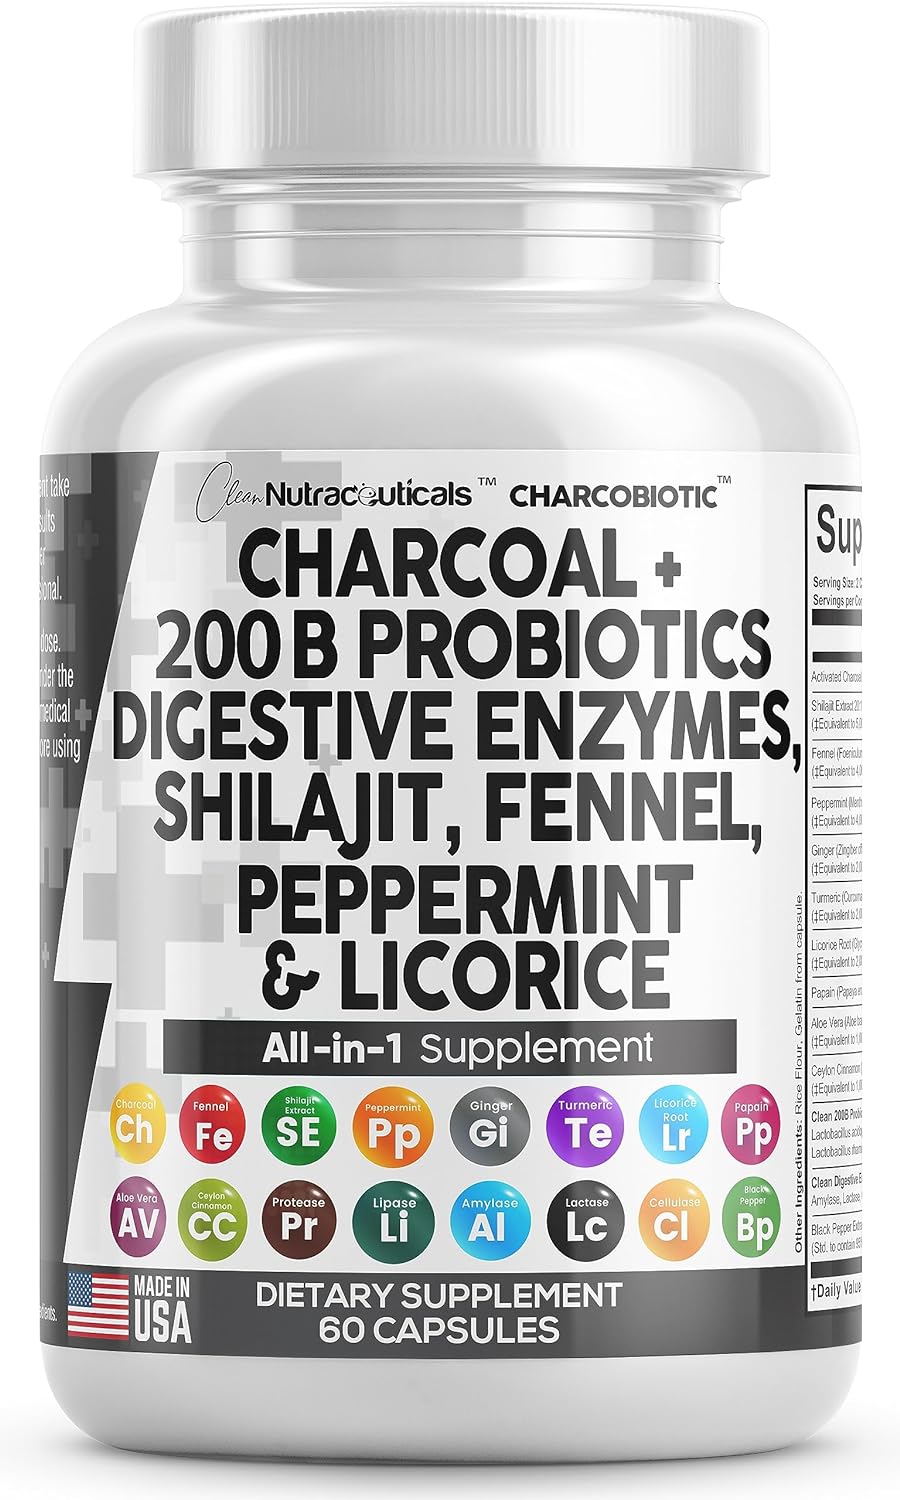 Charcobiotic™ with Activated Charcoal – Clean Nutraceuticals